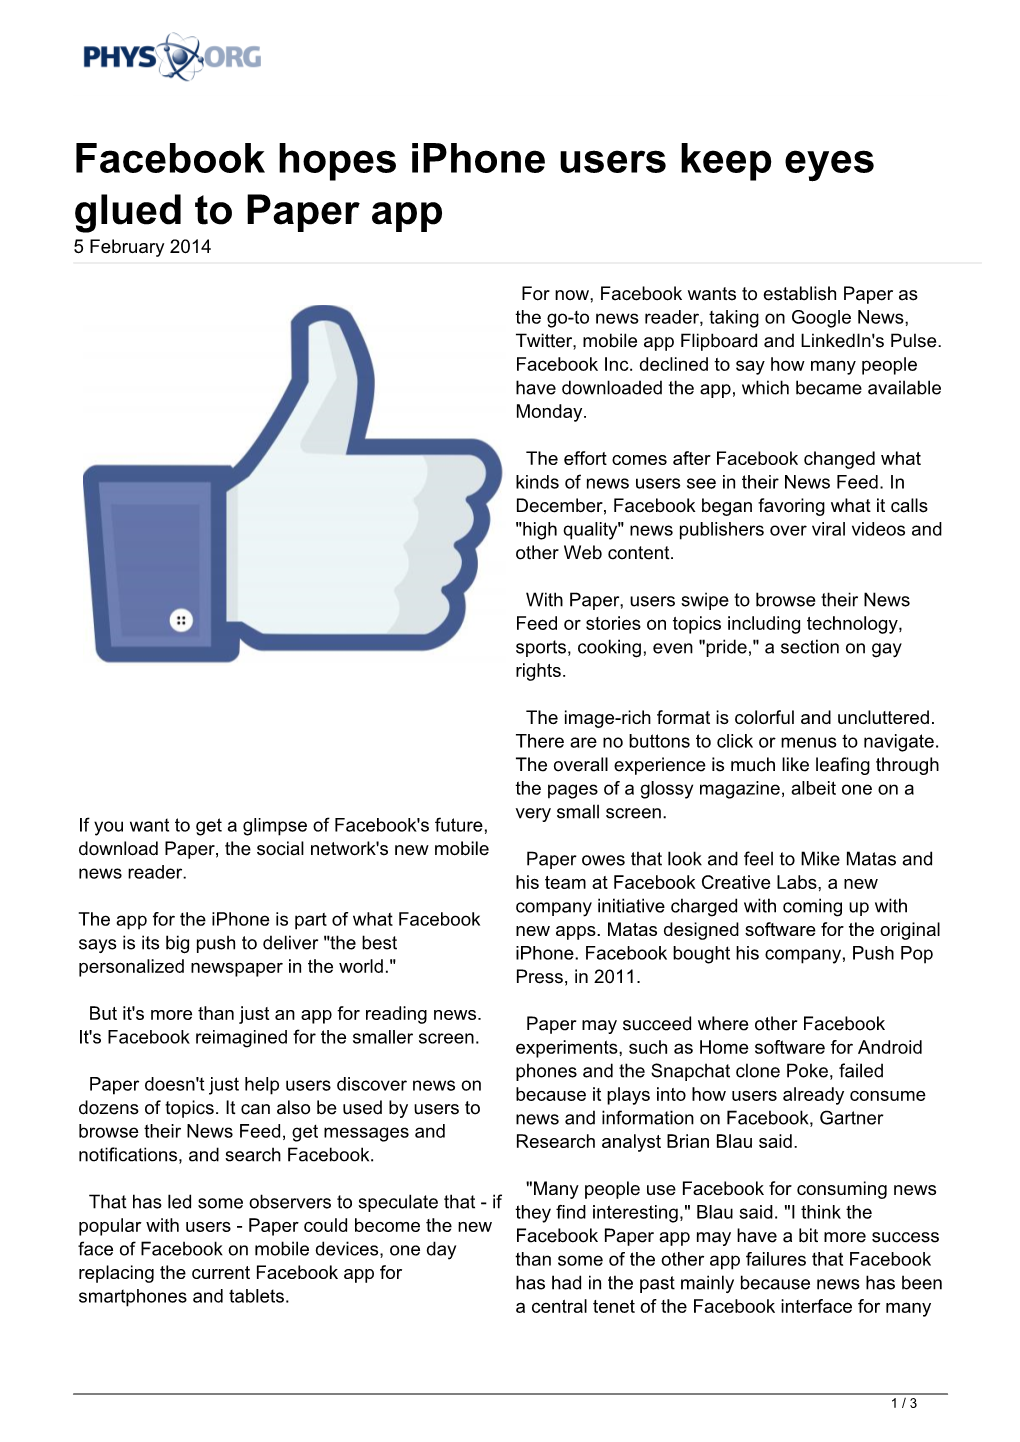 Facebook Hopes Iphone Users Keep Eyes Glued to Paper App 5 February 2014